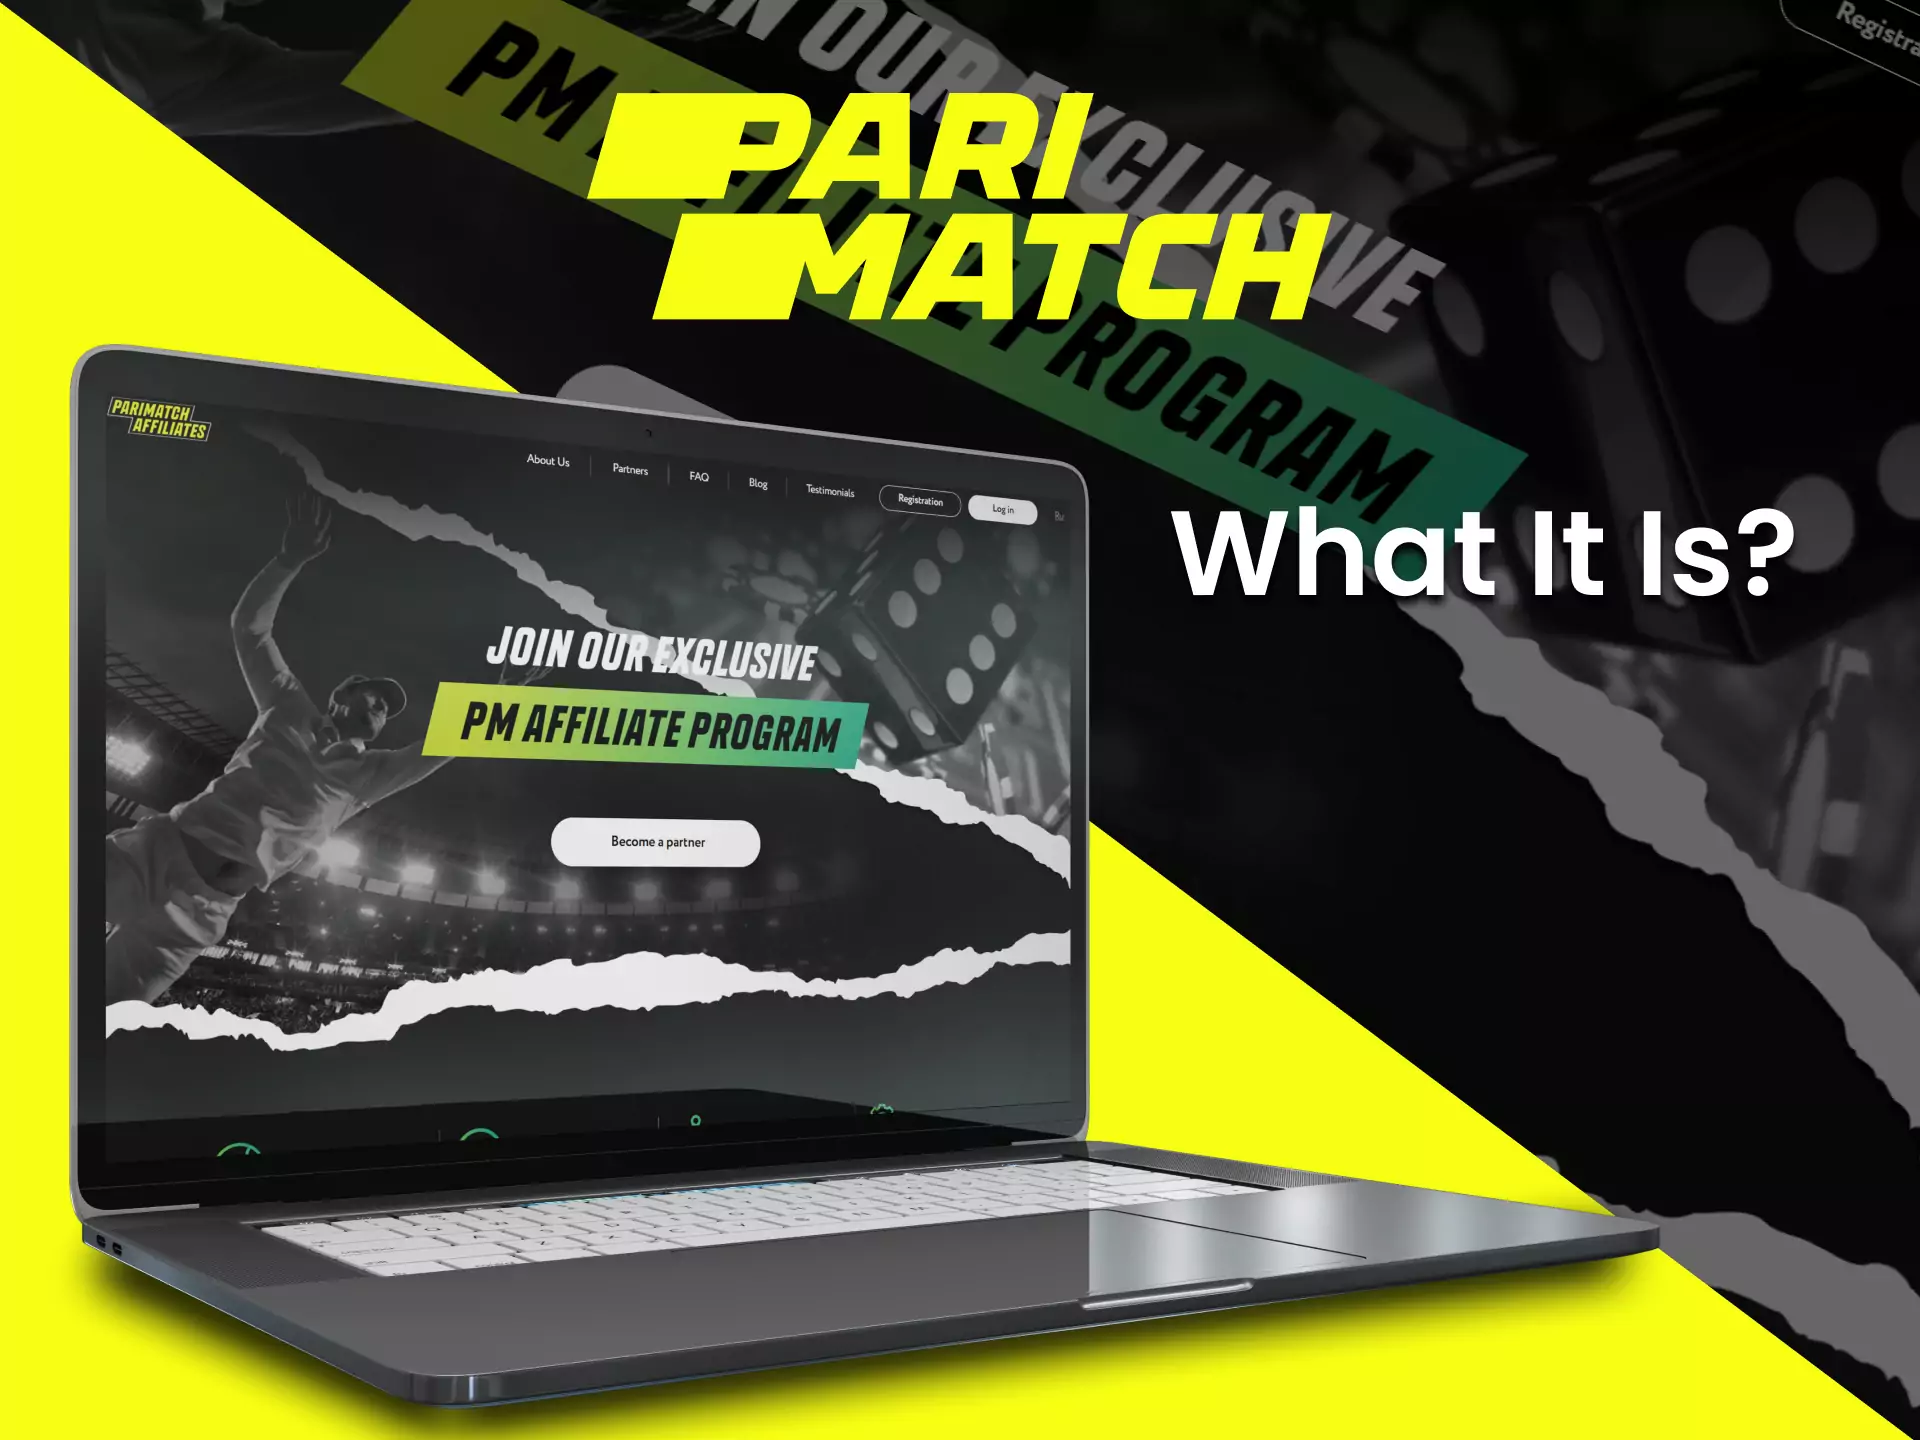 The affiliate program by Parimatch allows for earning more money from inviting friends to the betting platform.